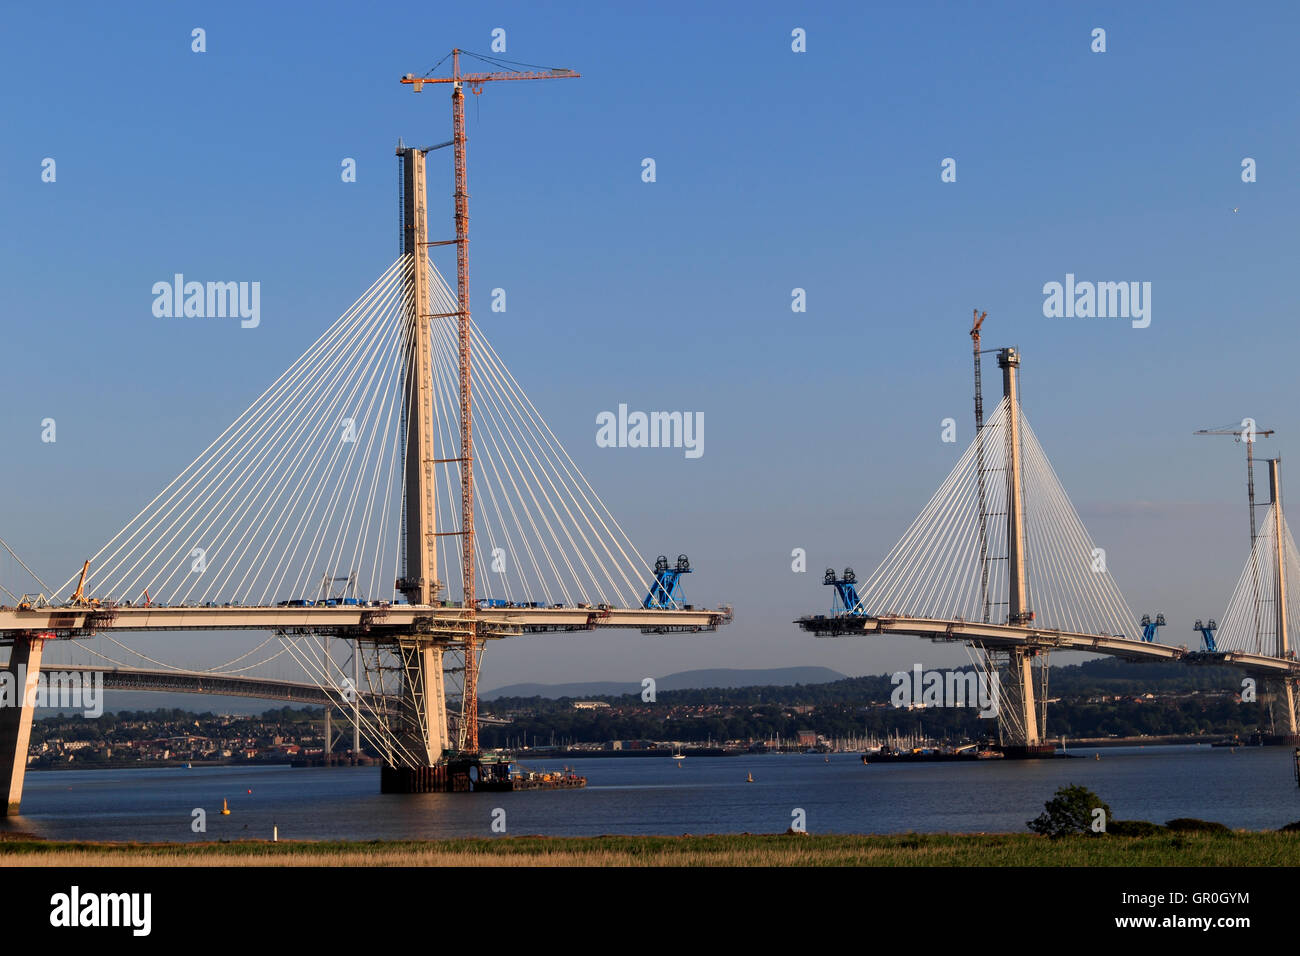 New Forth Bridge, Queensferry Crossing under construction, taken from North Queensferry, Lothian, Scotland, UK Stock Photo